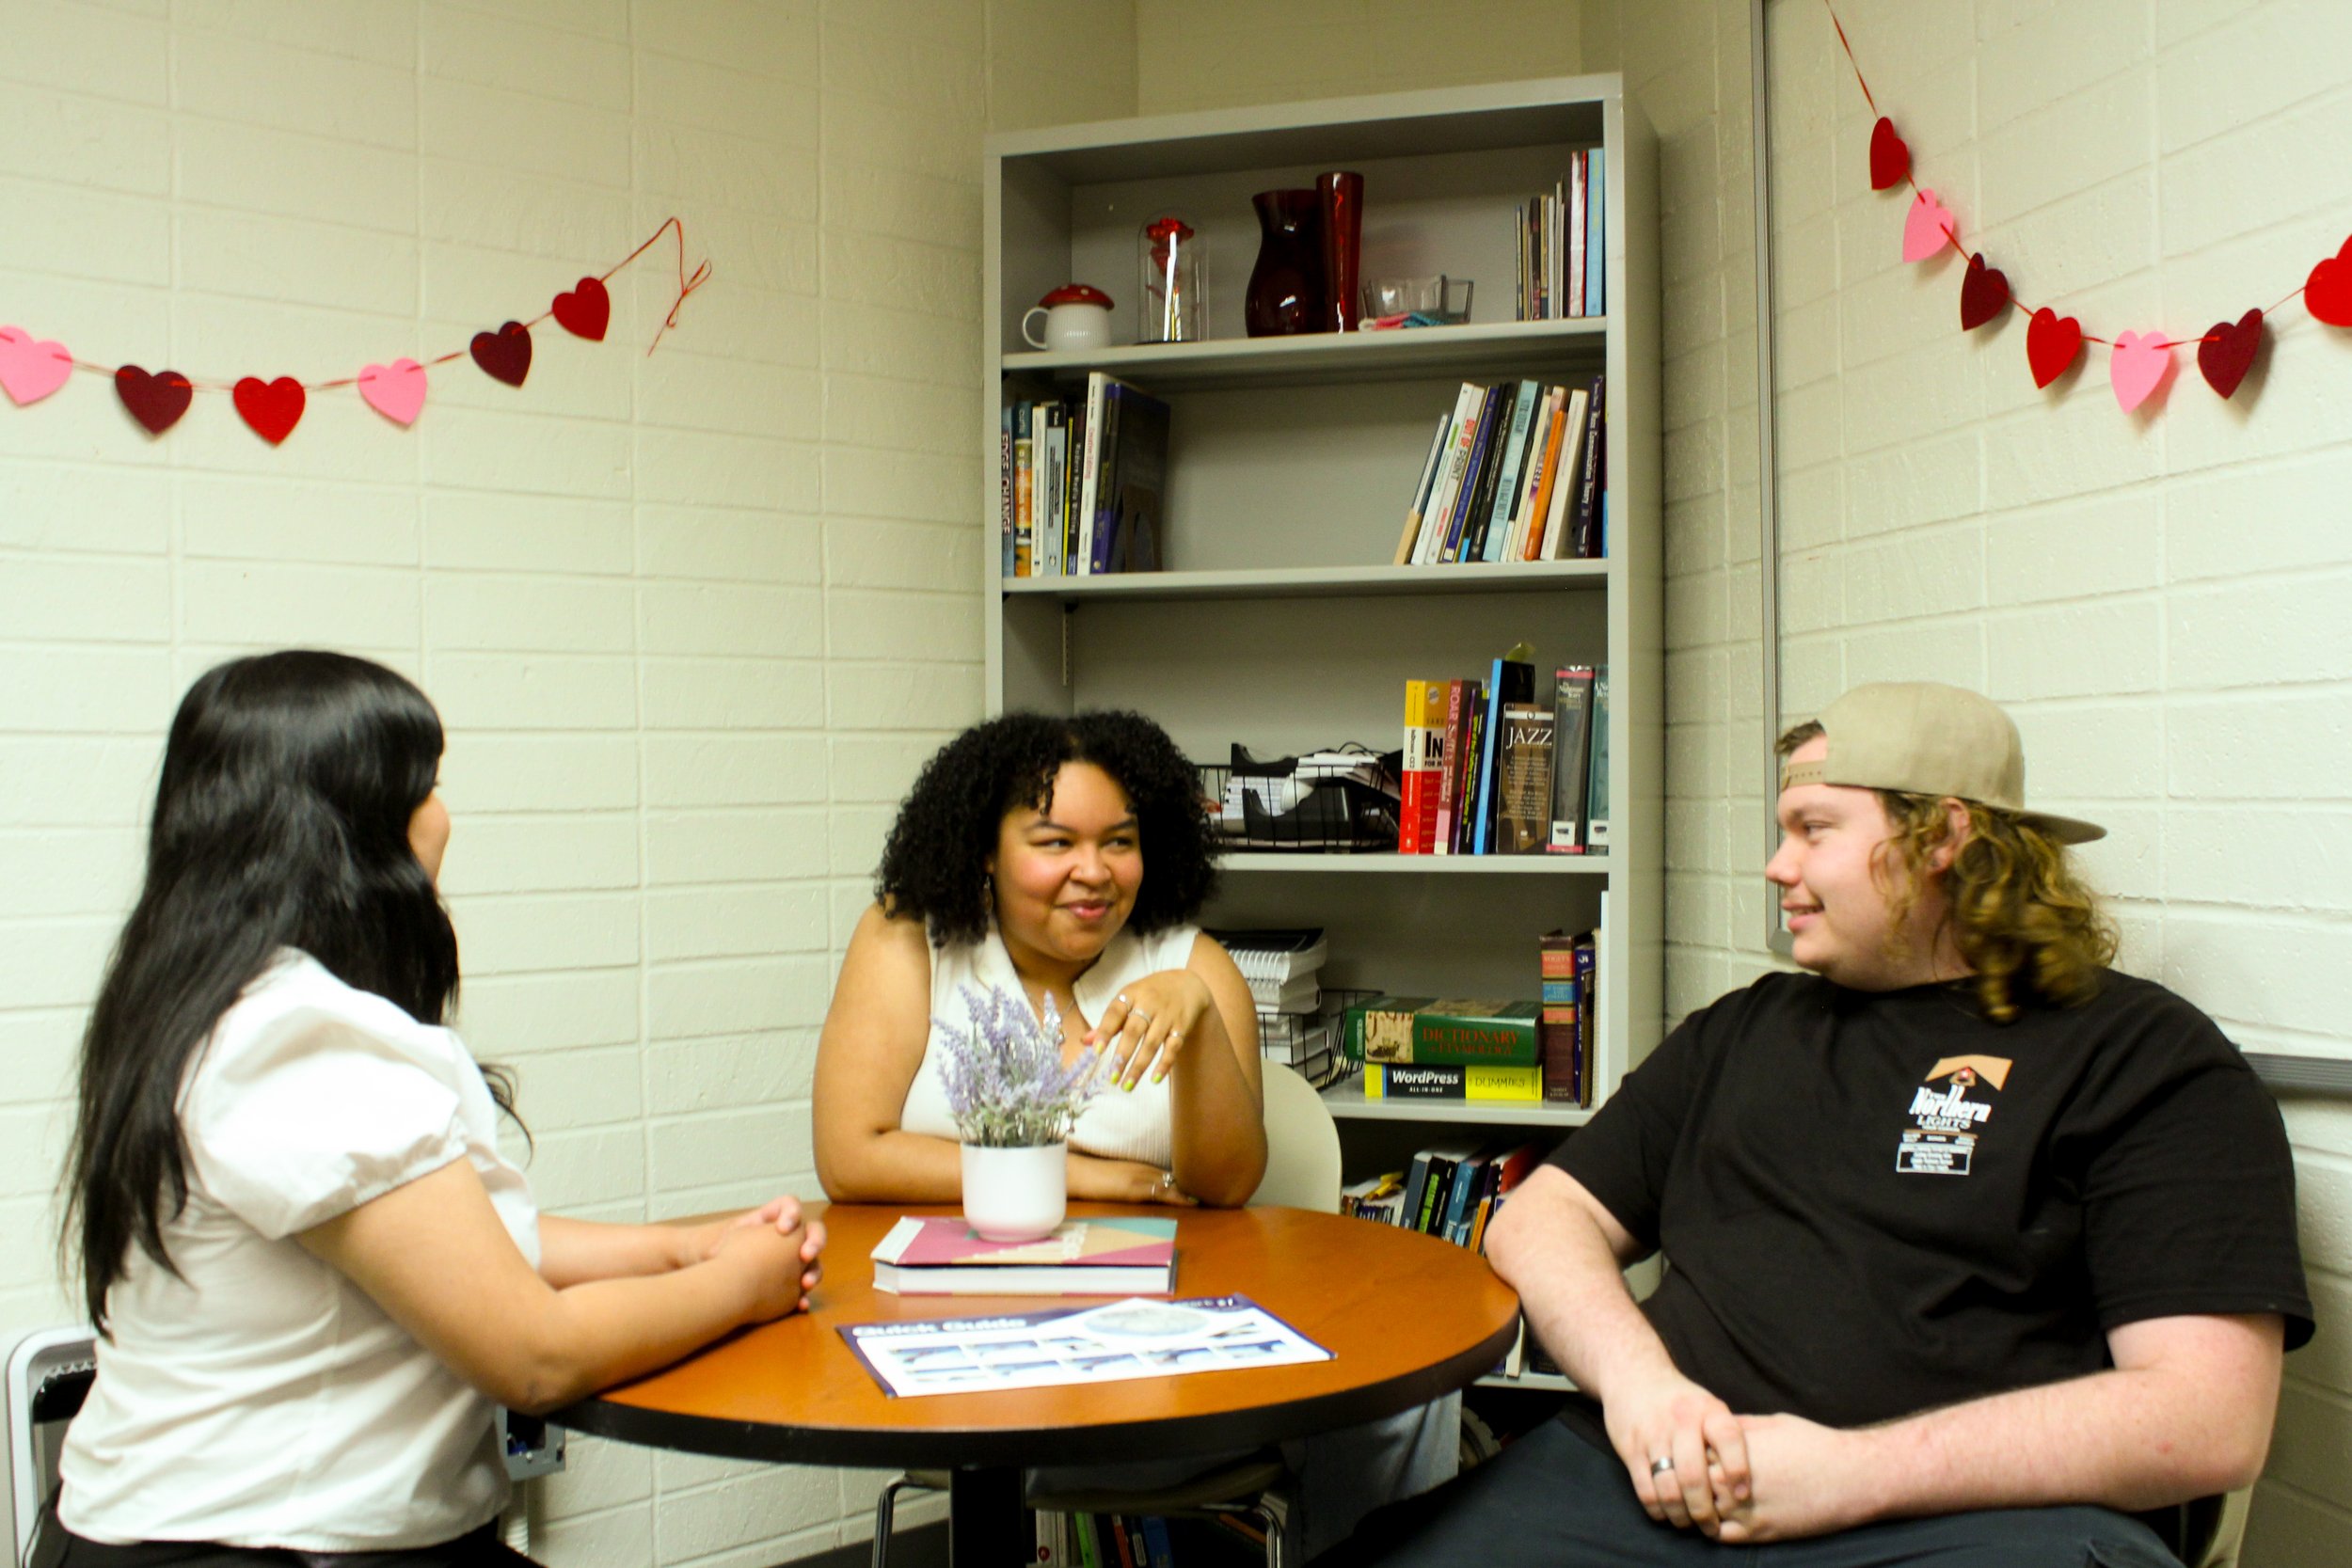 Bri, Nya Hardaway, and Nate Gosney having a conversation in the office.